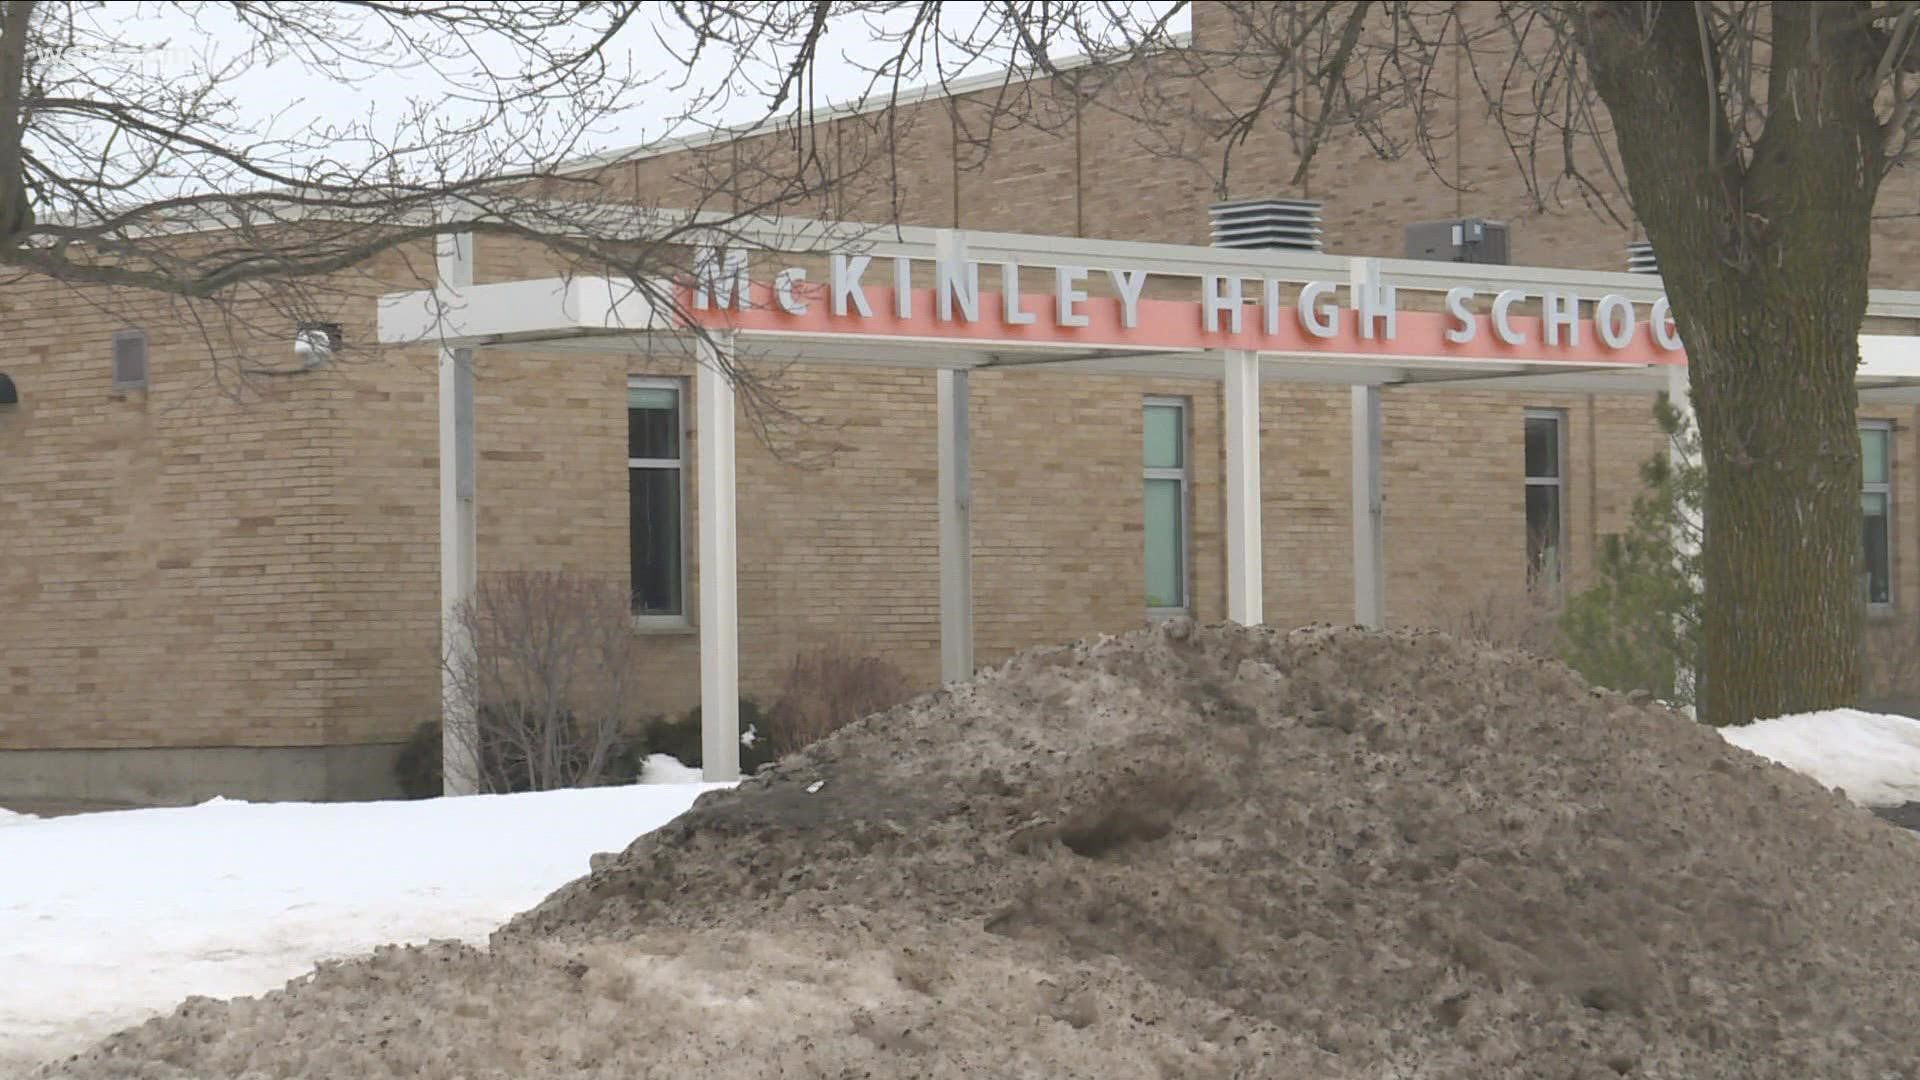 Buffalo police arrested a 17 year old in connection with the stabbing at McKinley High School. The search still continues for a second suspect linked to a shooting.